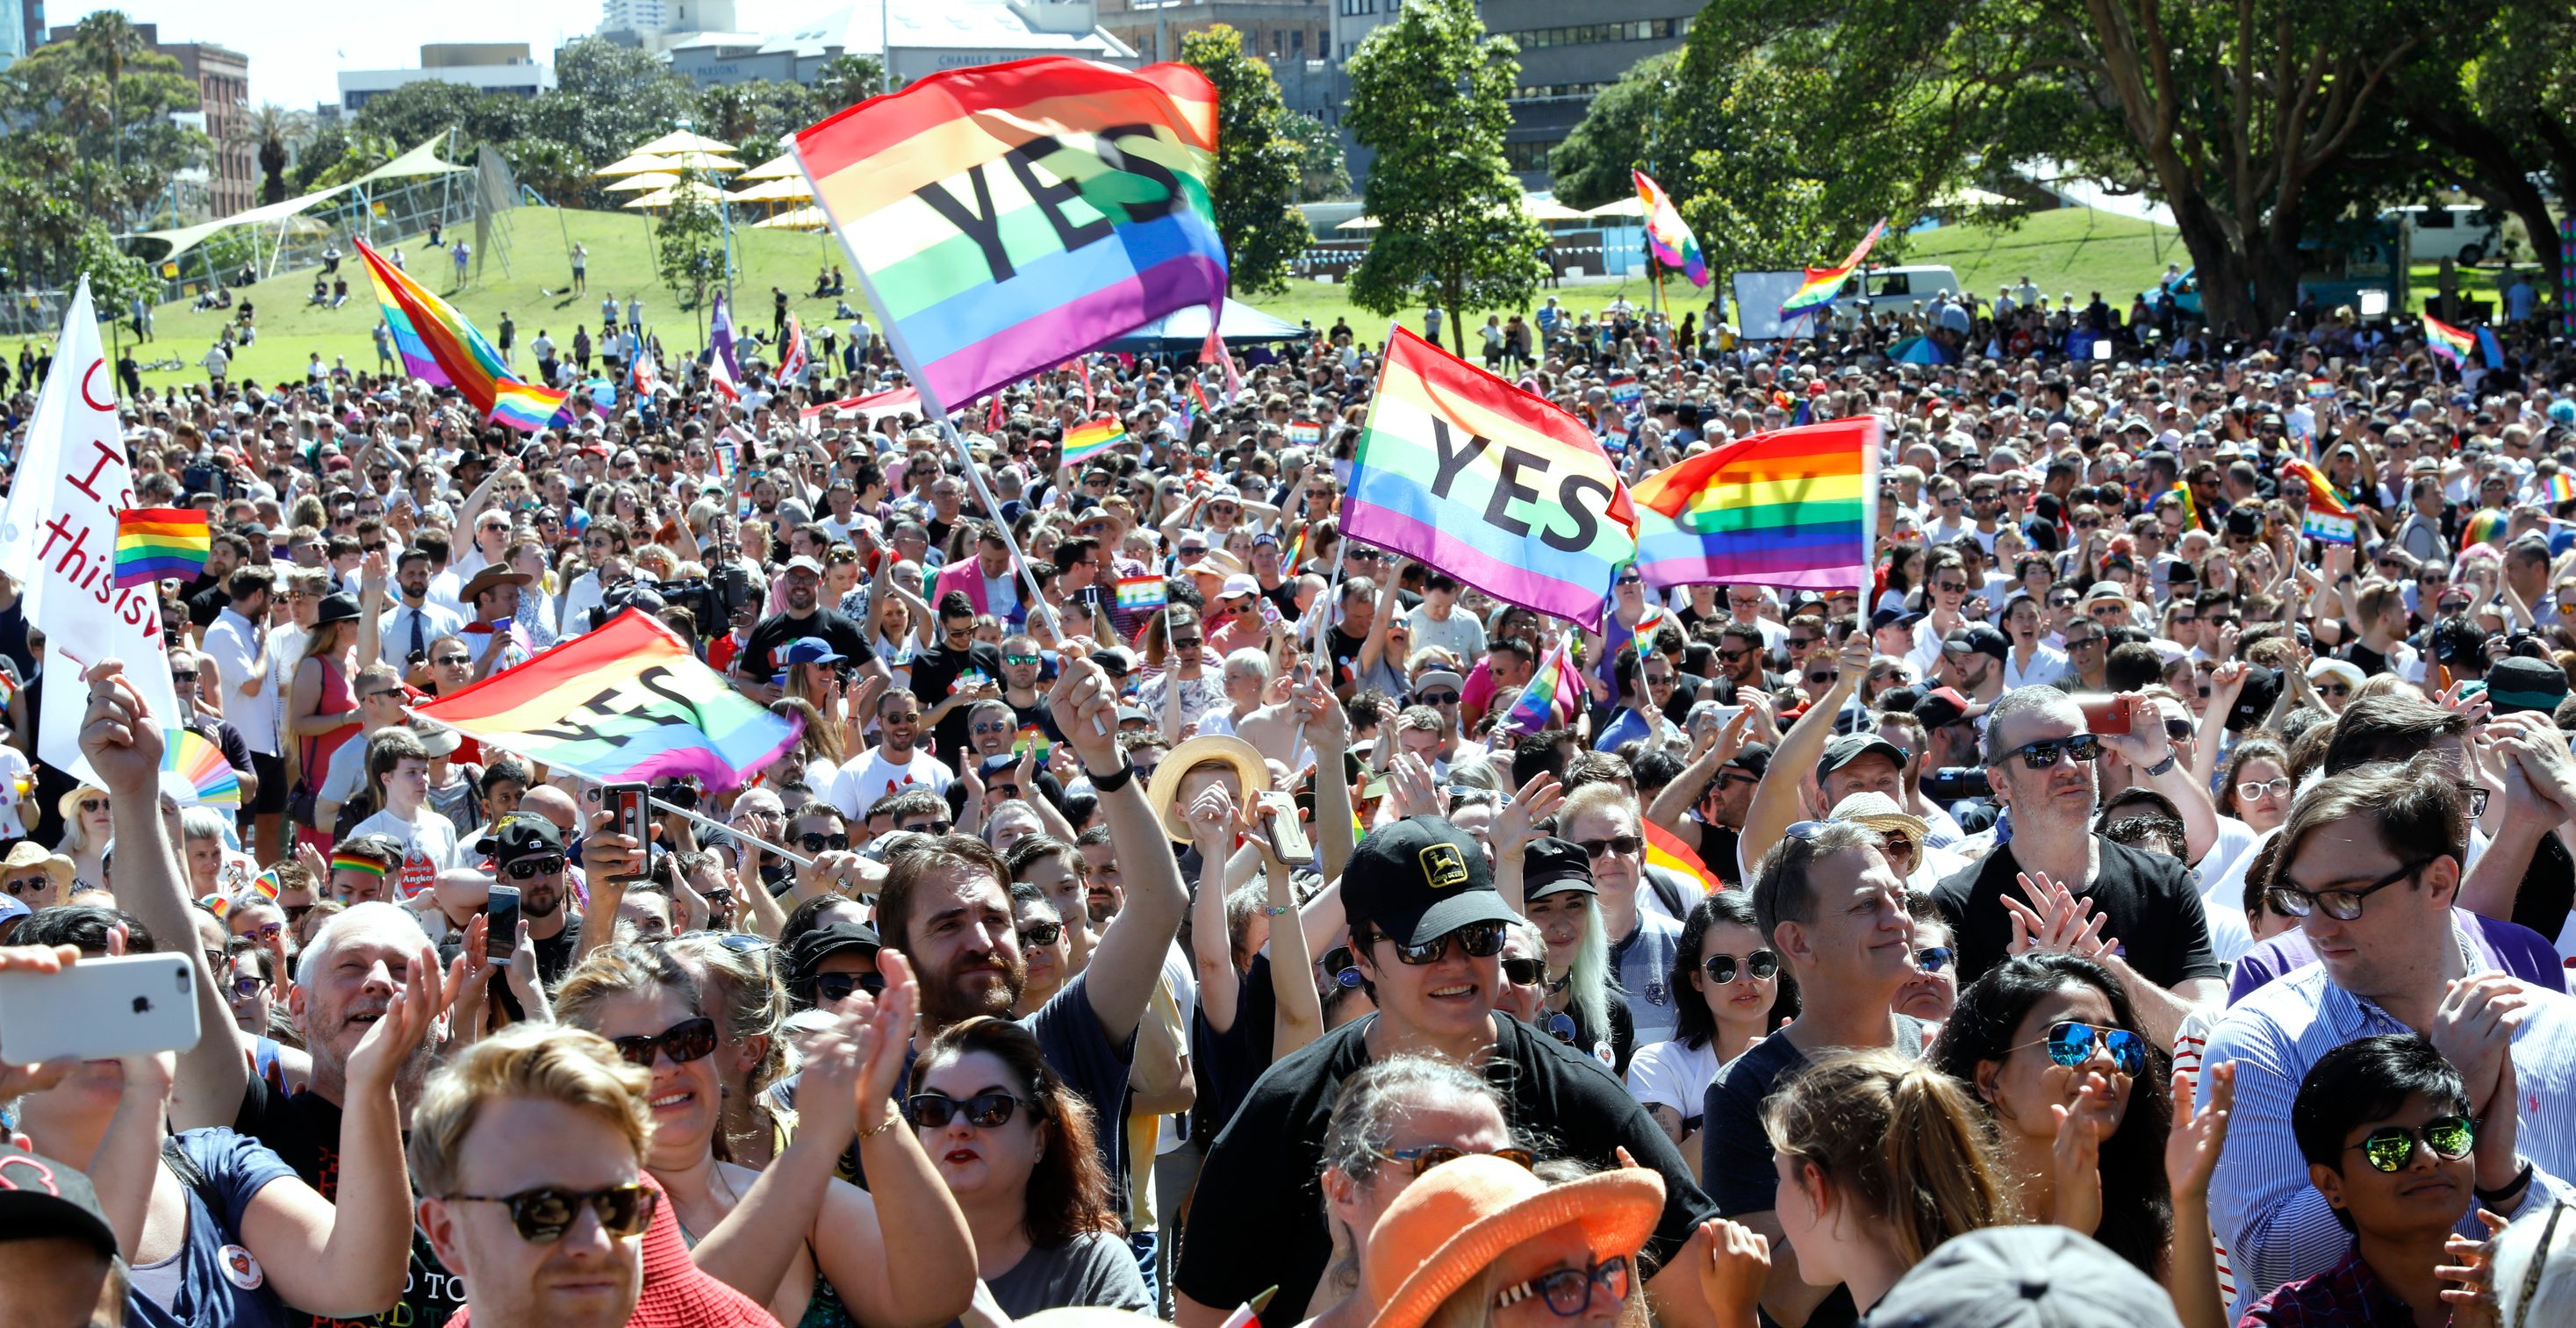 Australia Marks Five Years Of Marriage Equality – What’s Next?